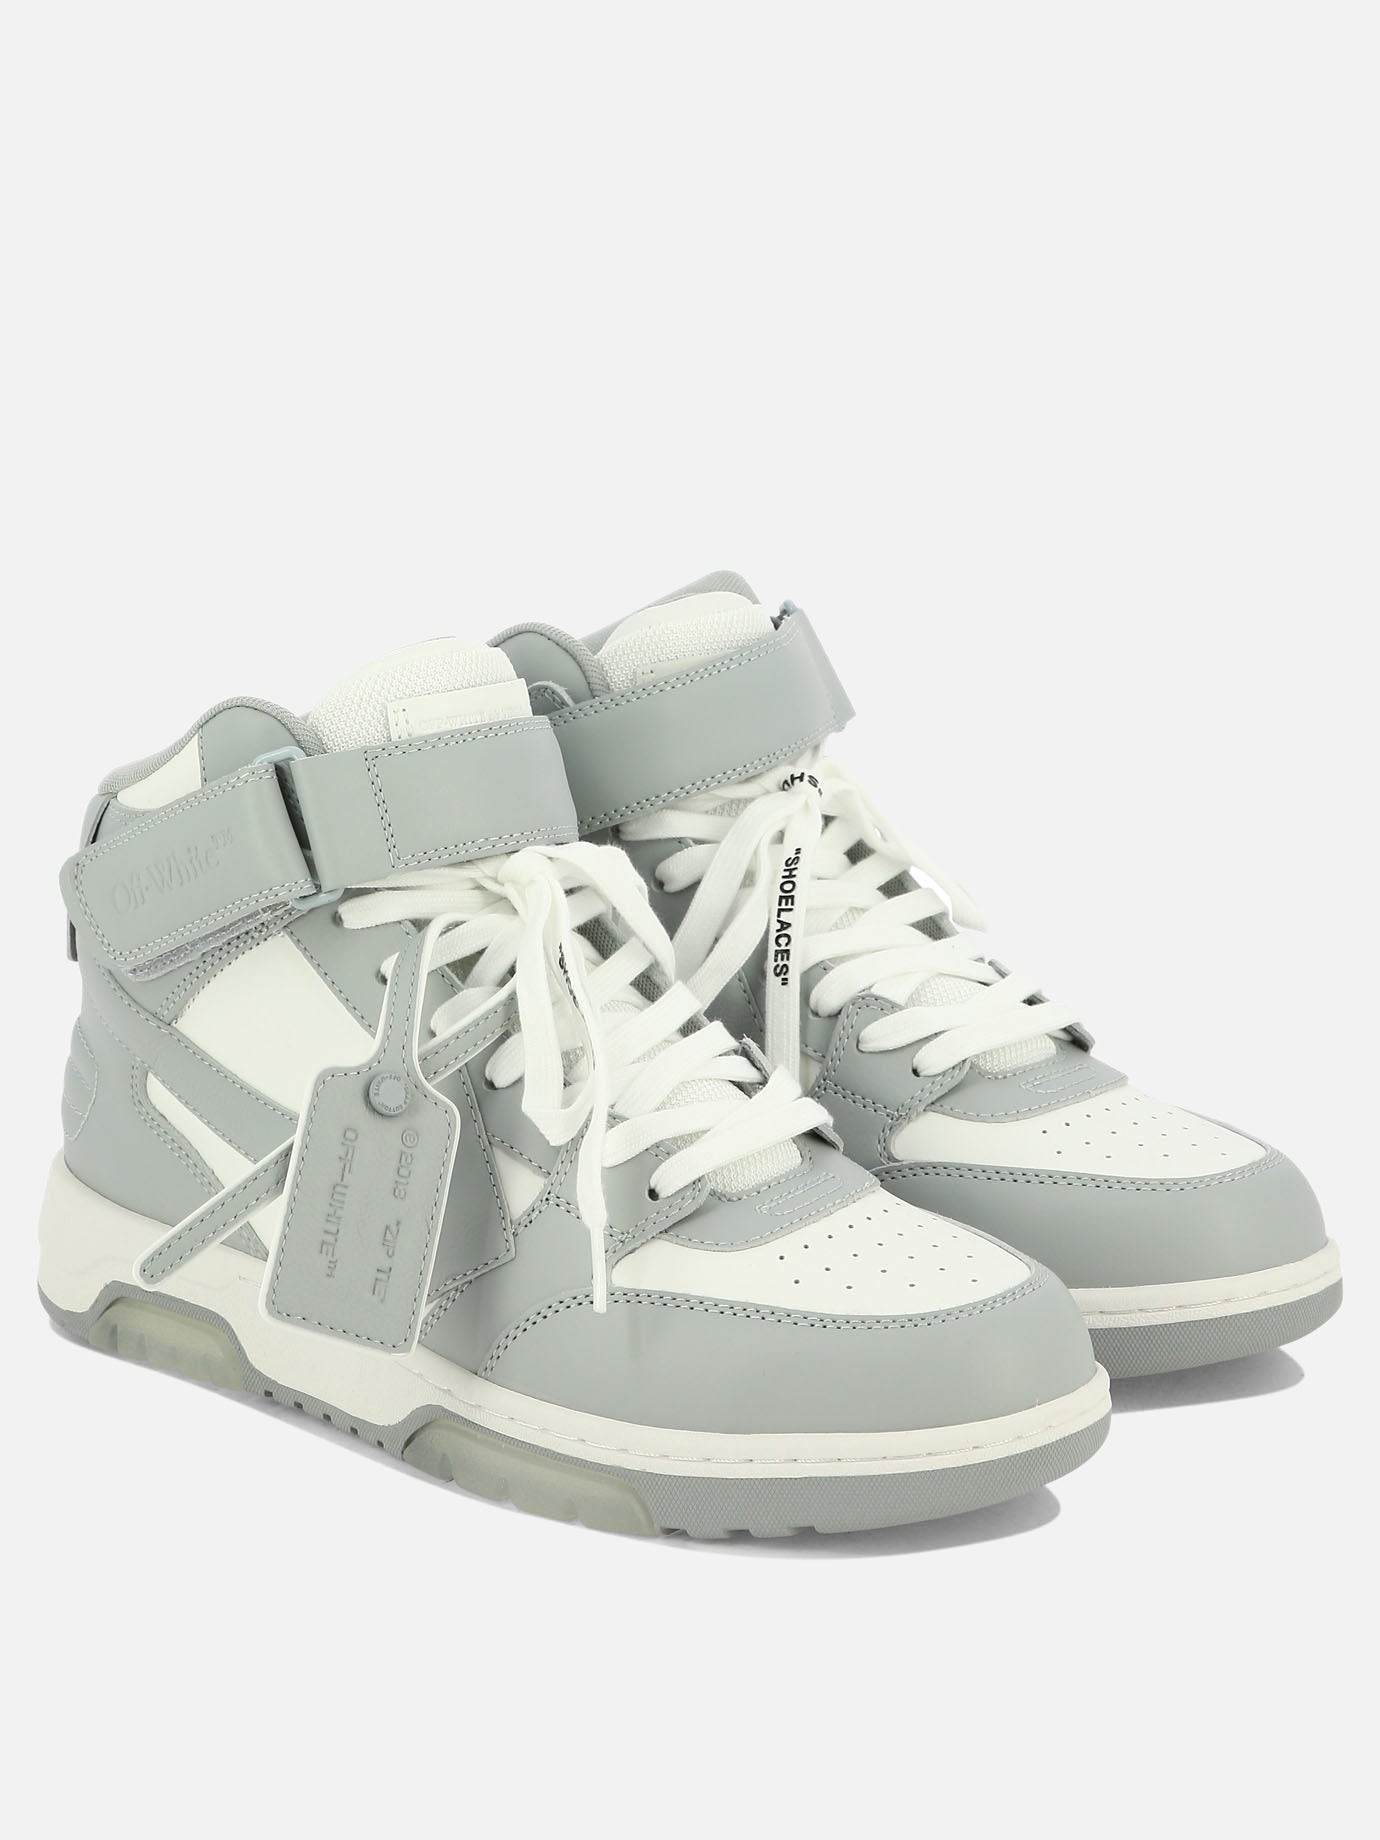 "Out Of Office" sneakers